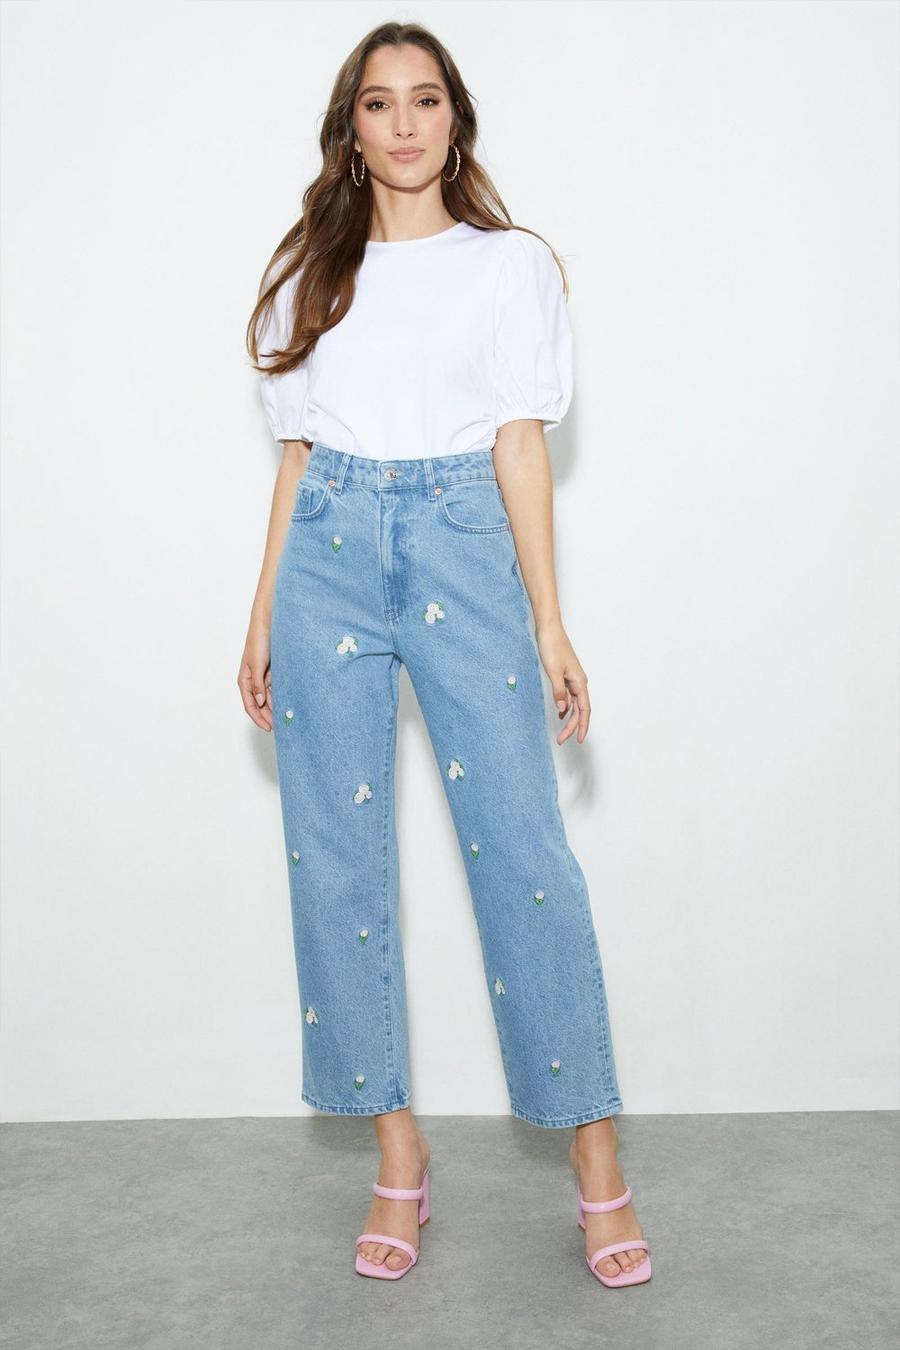 Floral Embroidered Jean